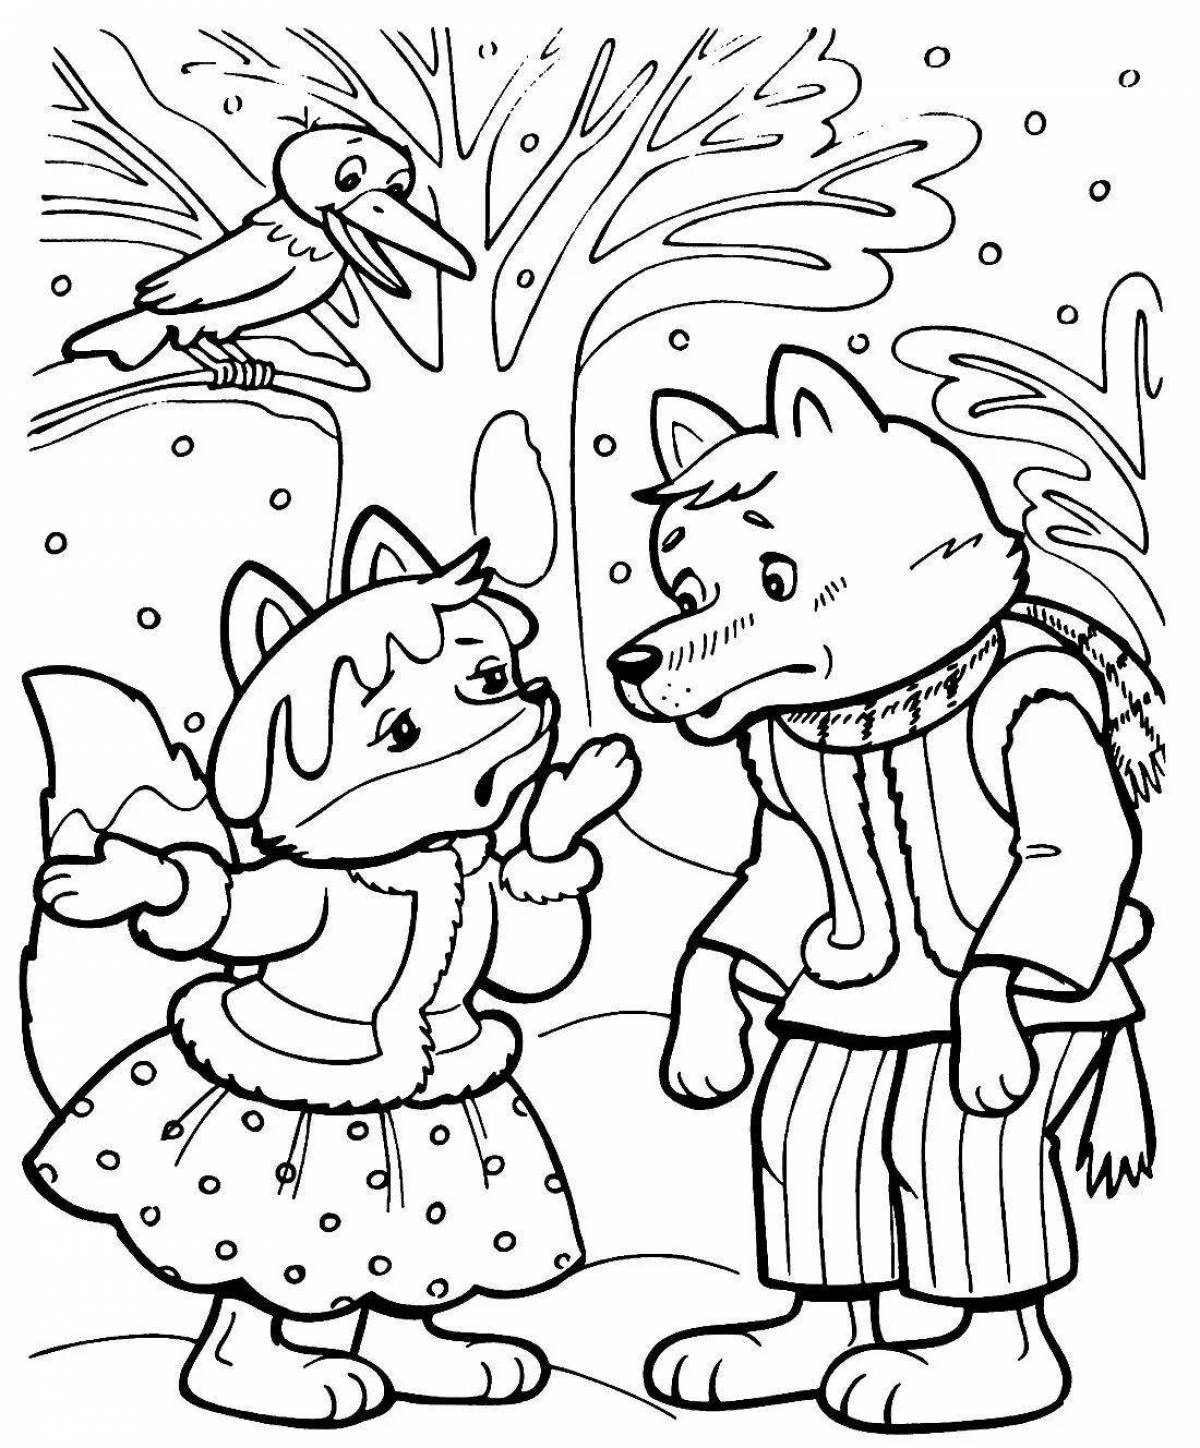 Cute snowman and fox coloring book